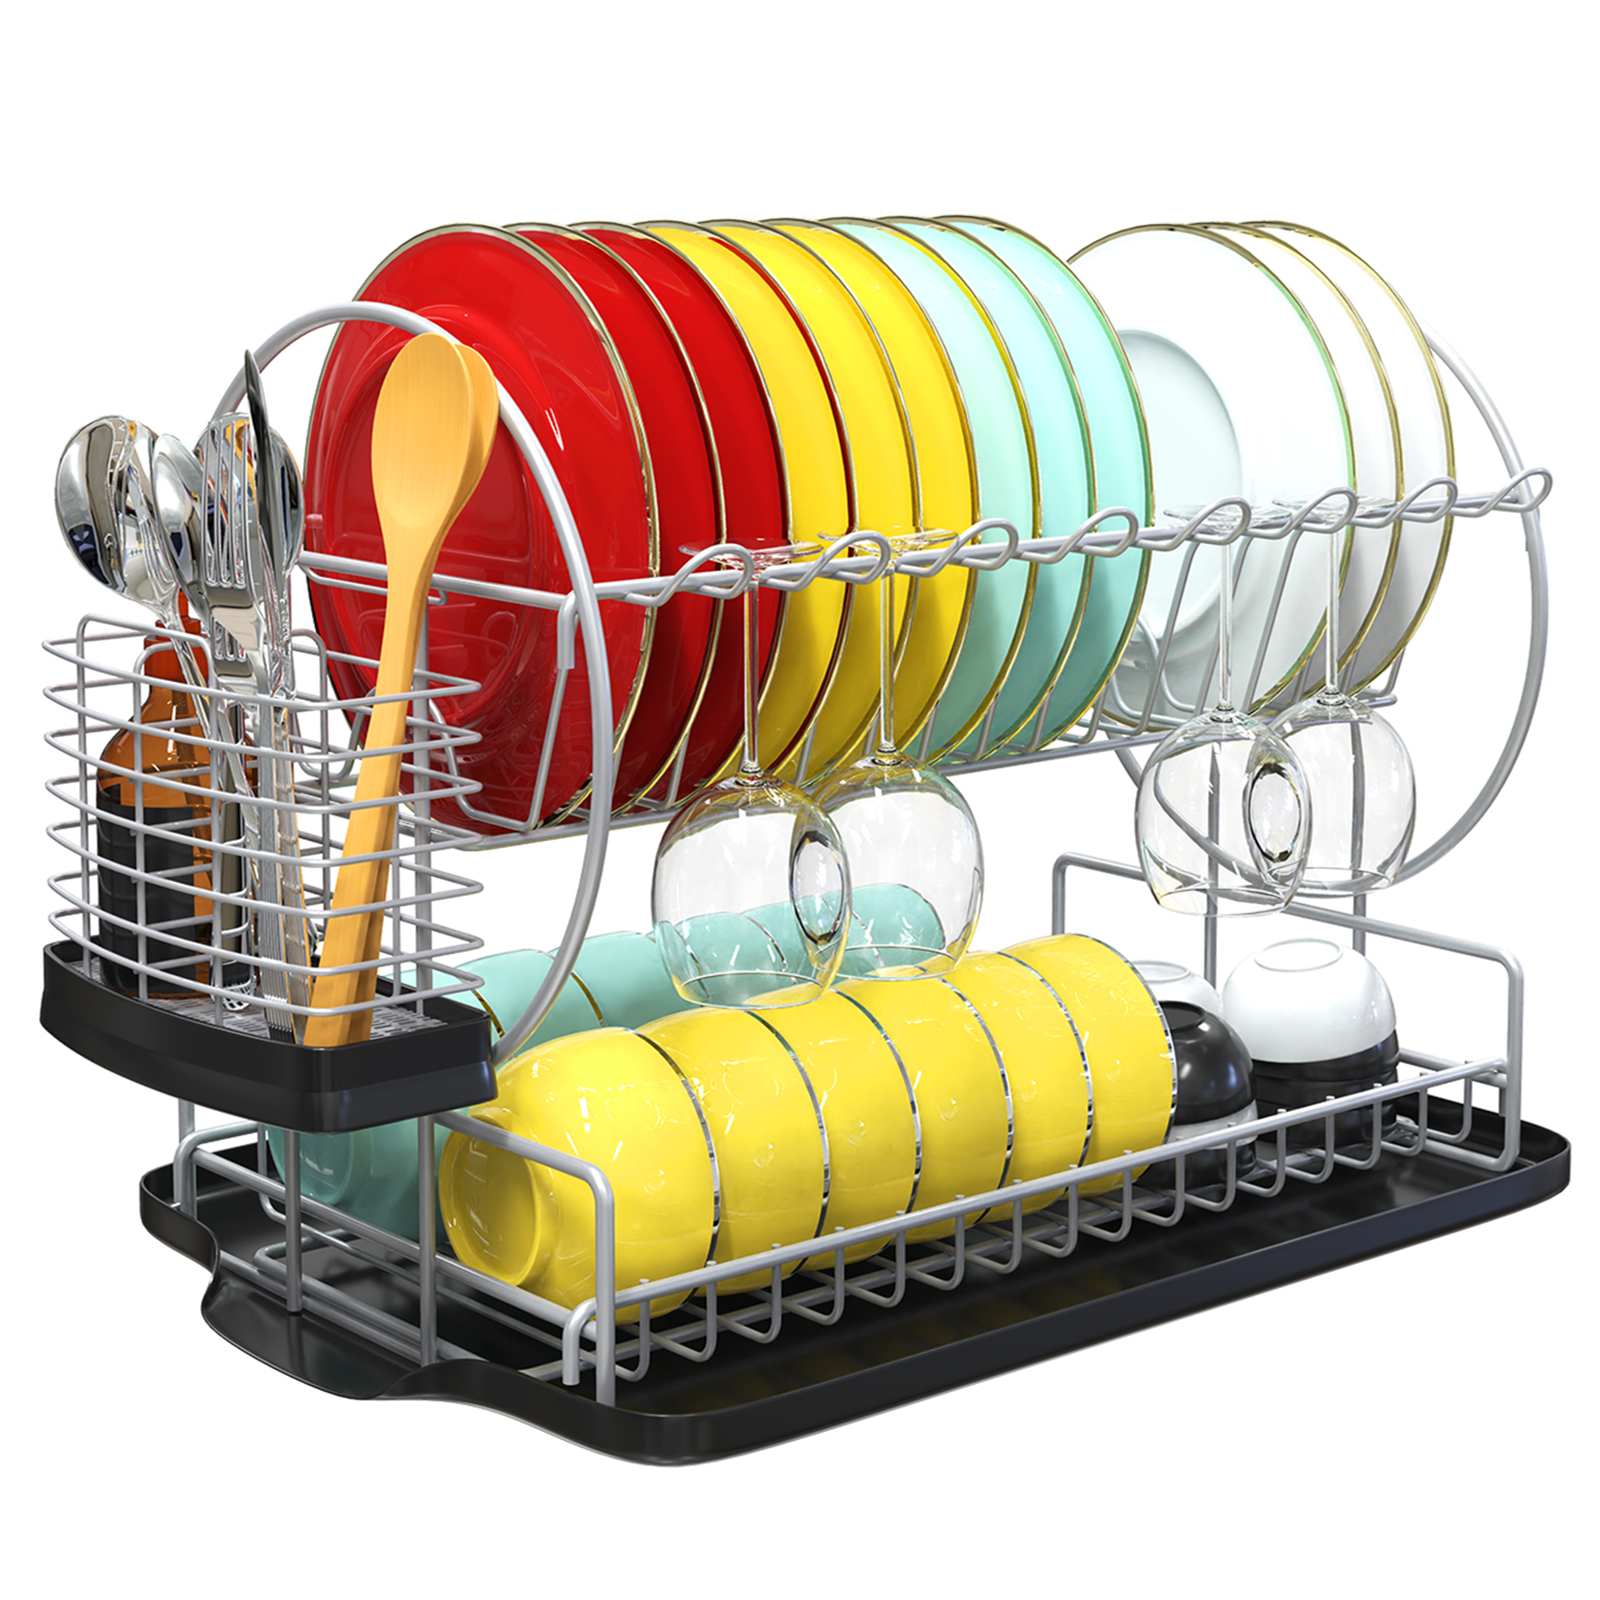 2-Tier Drying Dish Rack and Drain Board Set Utensil Holder Metal Kitchen  Counter